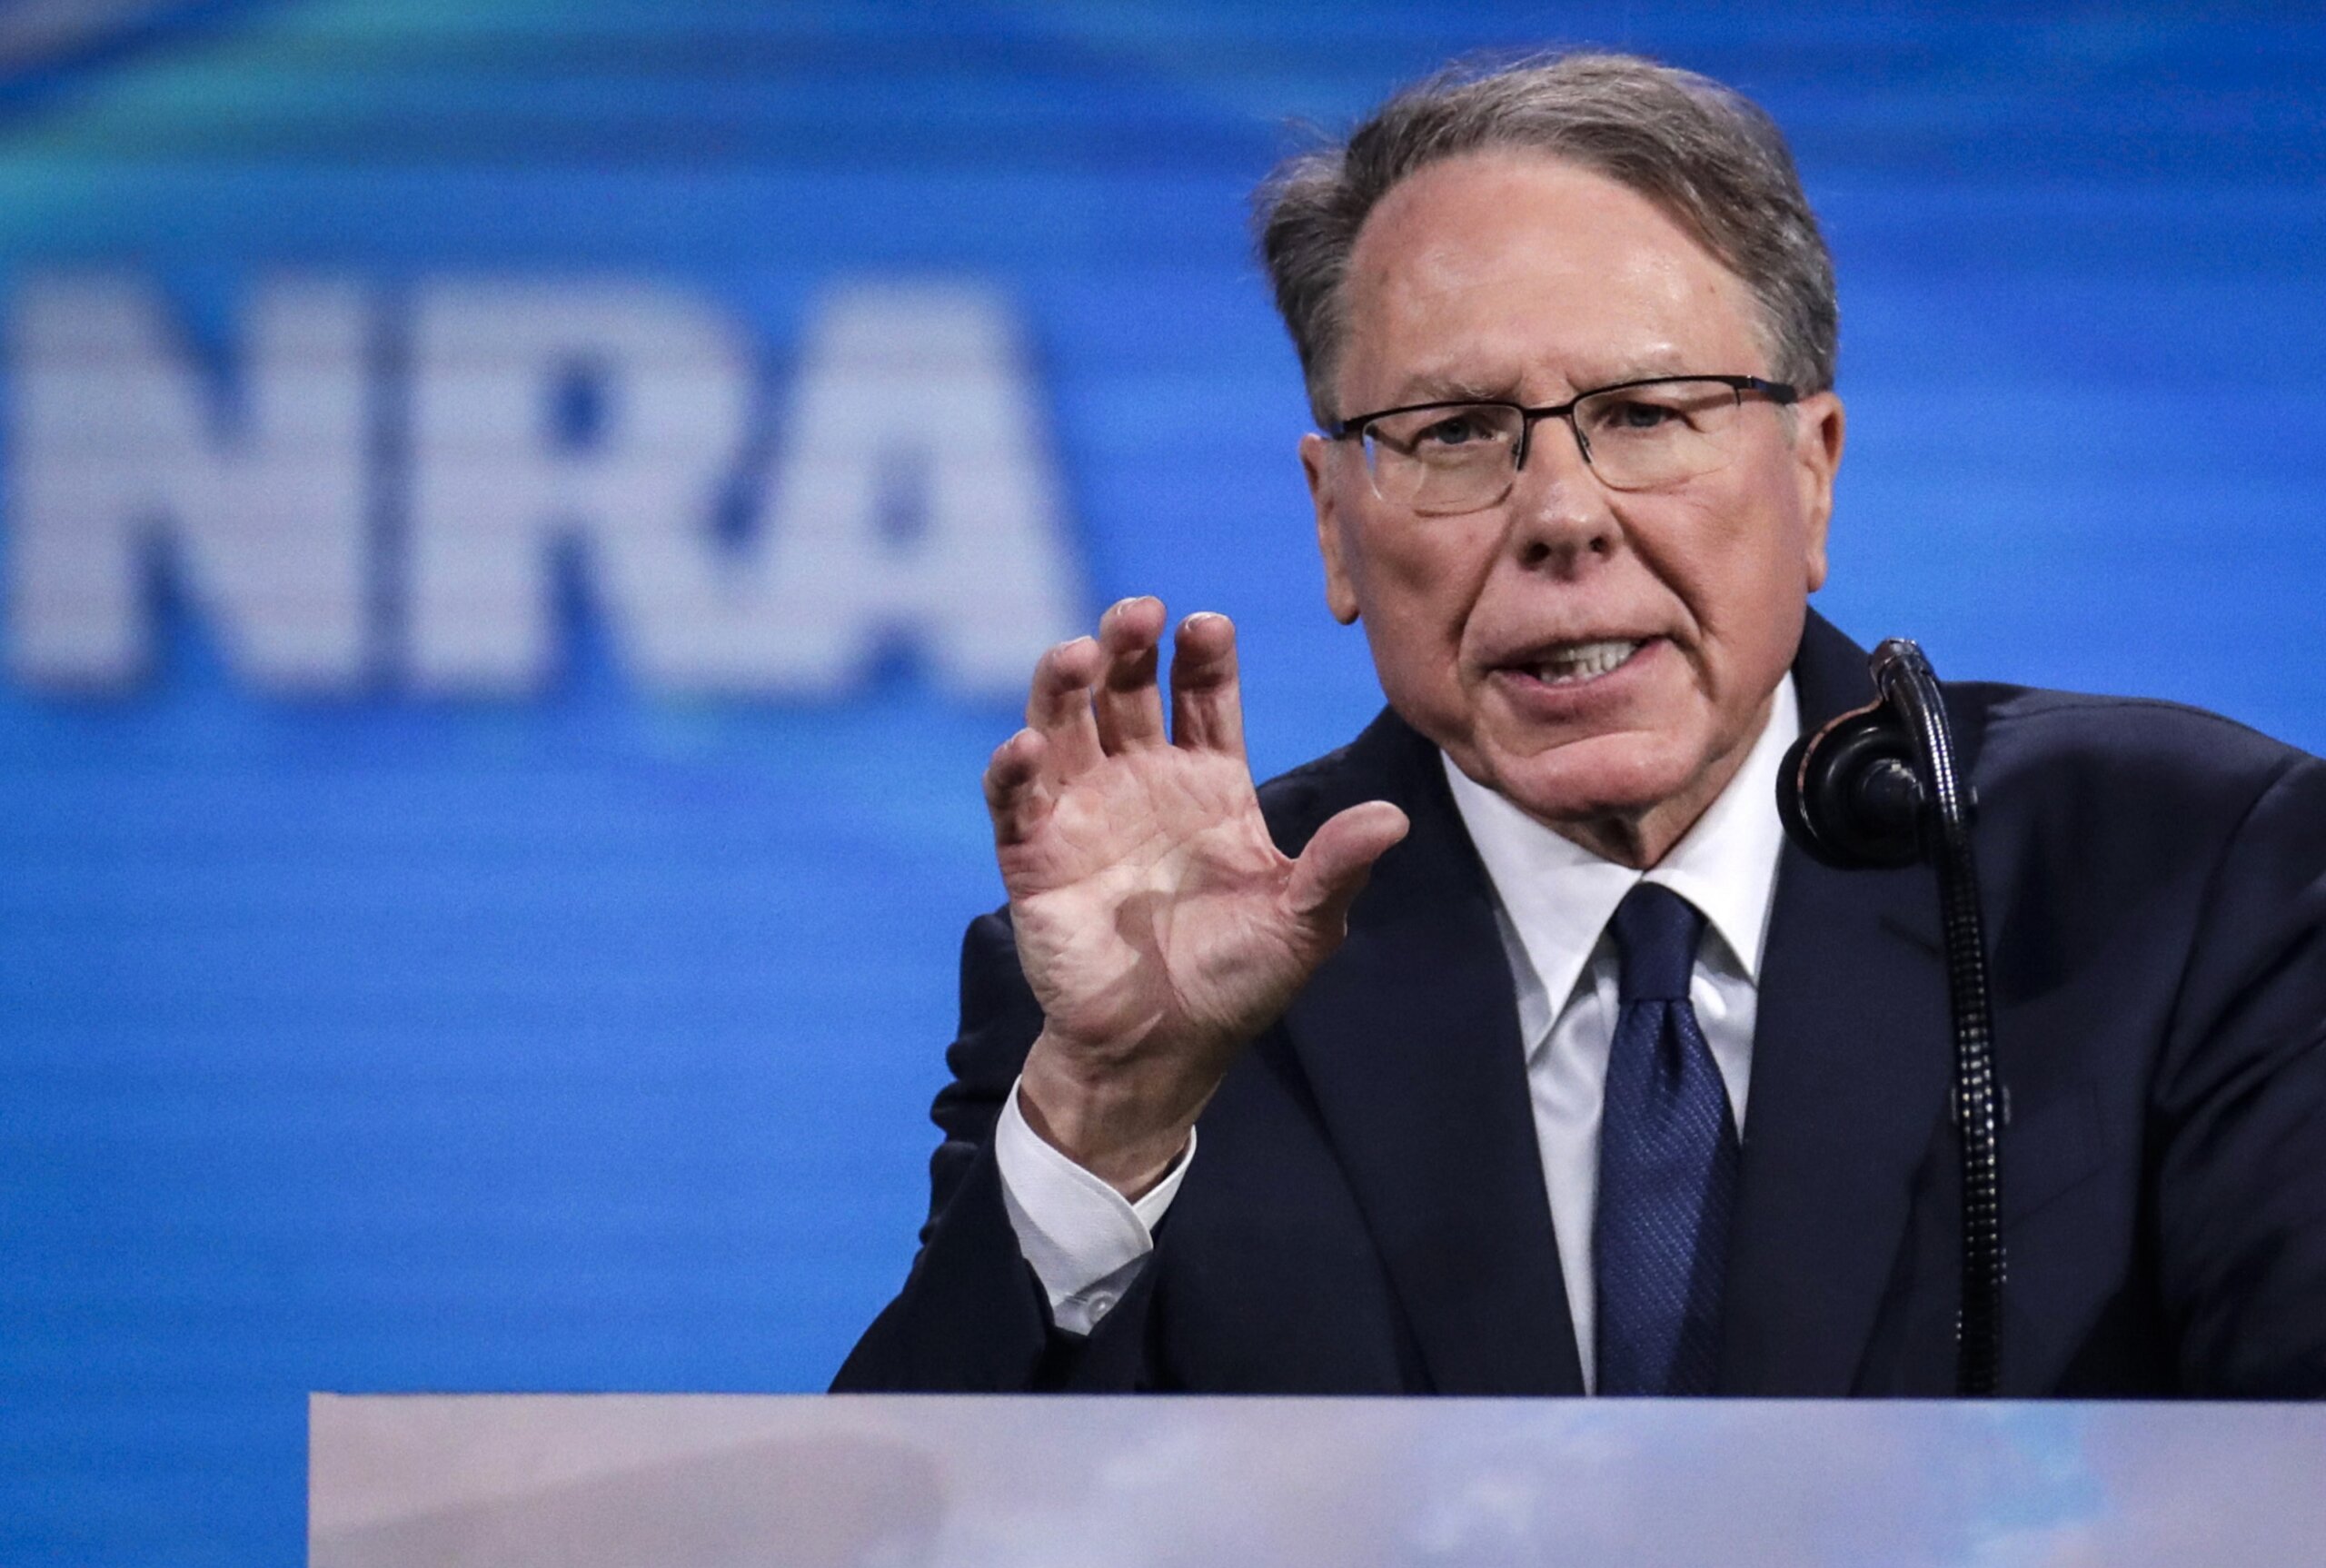 NRA Chief LaPierre Confesses to Misusing Funds for Personal Travel